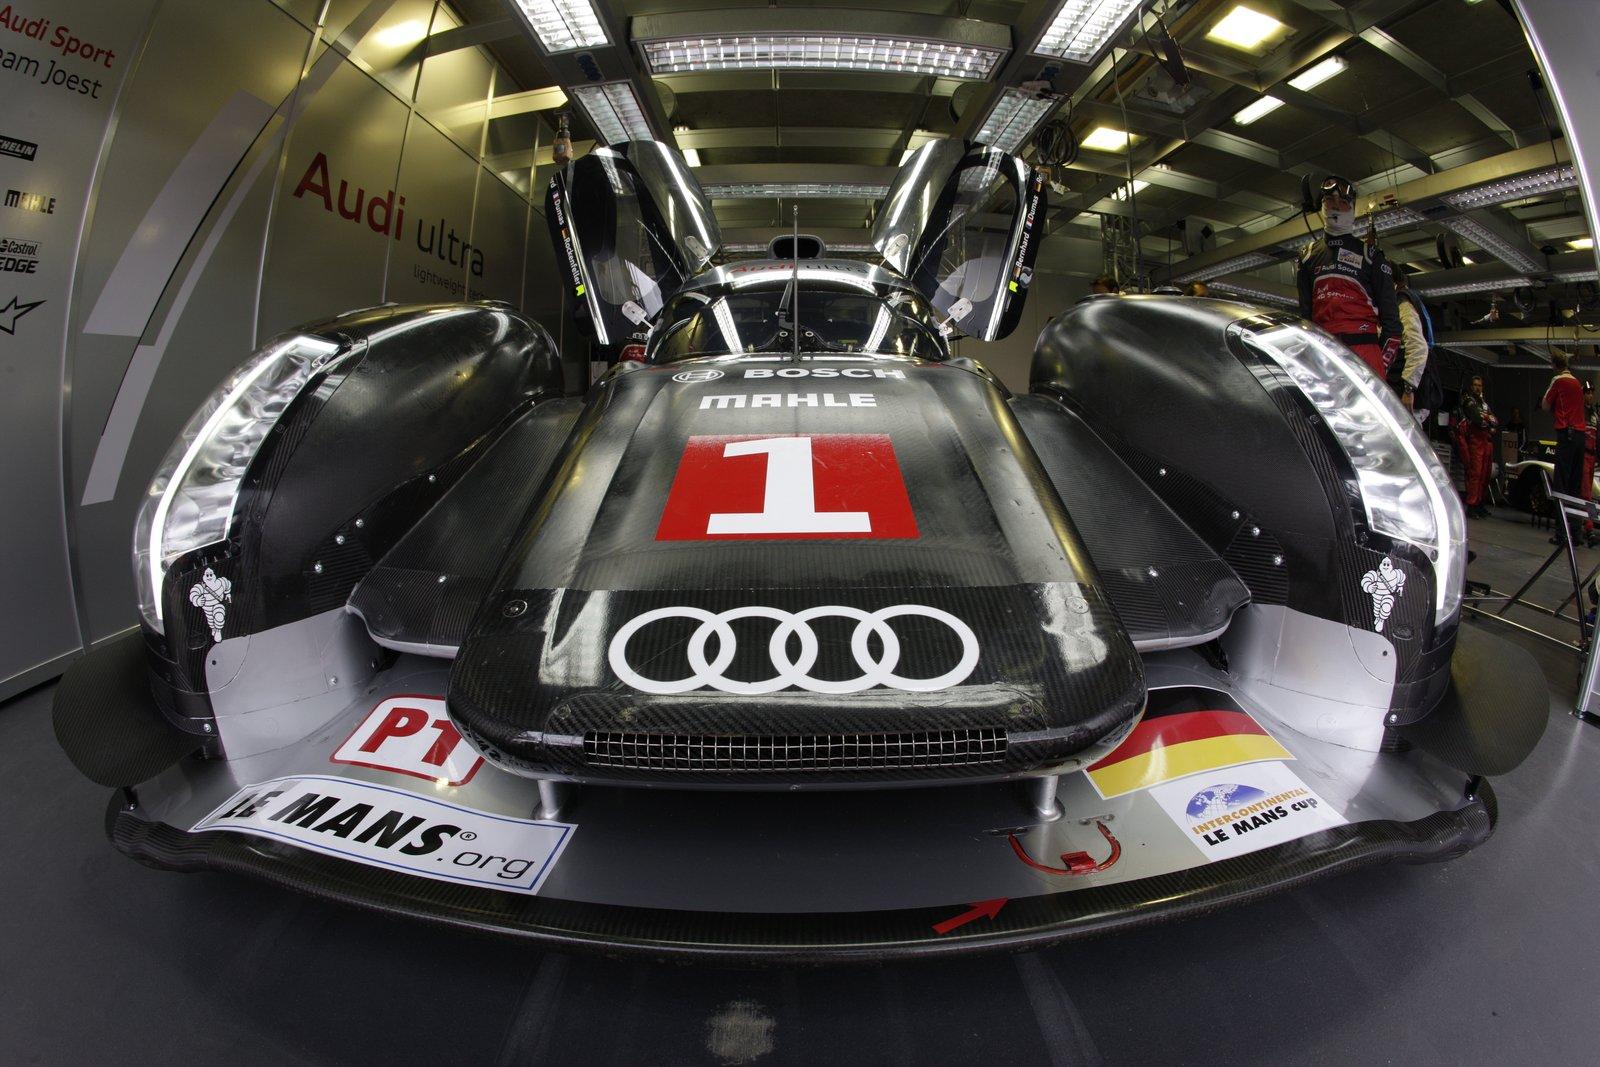 Le Mans 24hours Audi R18 TDI Hybrid 2012 photo 75187 picture at